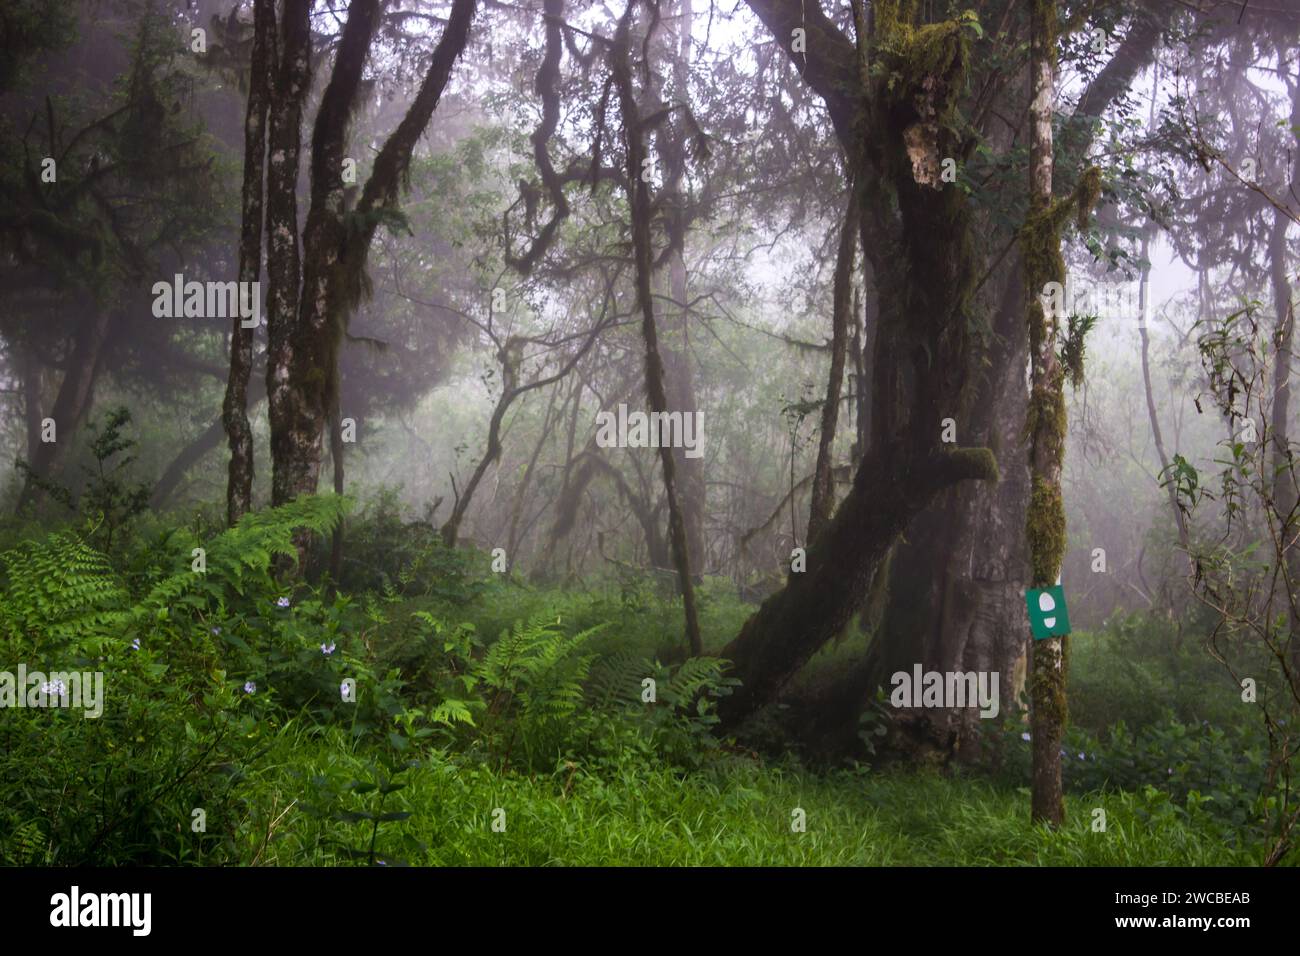 The rainforest of Magoebaskloof, South Africa, shrouded in mist forming a mysterious dreamlike landscape, Stock Photo